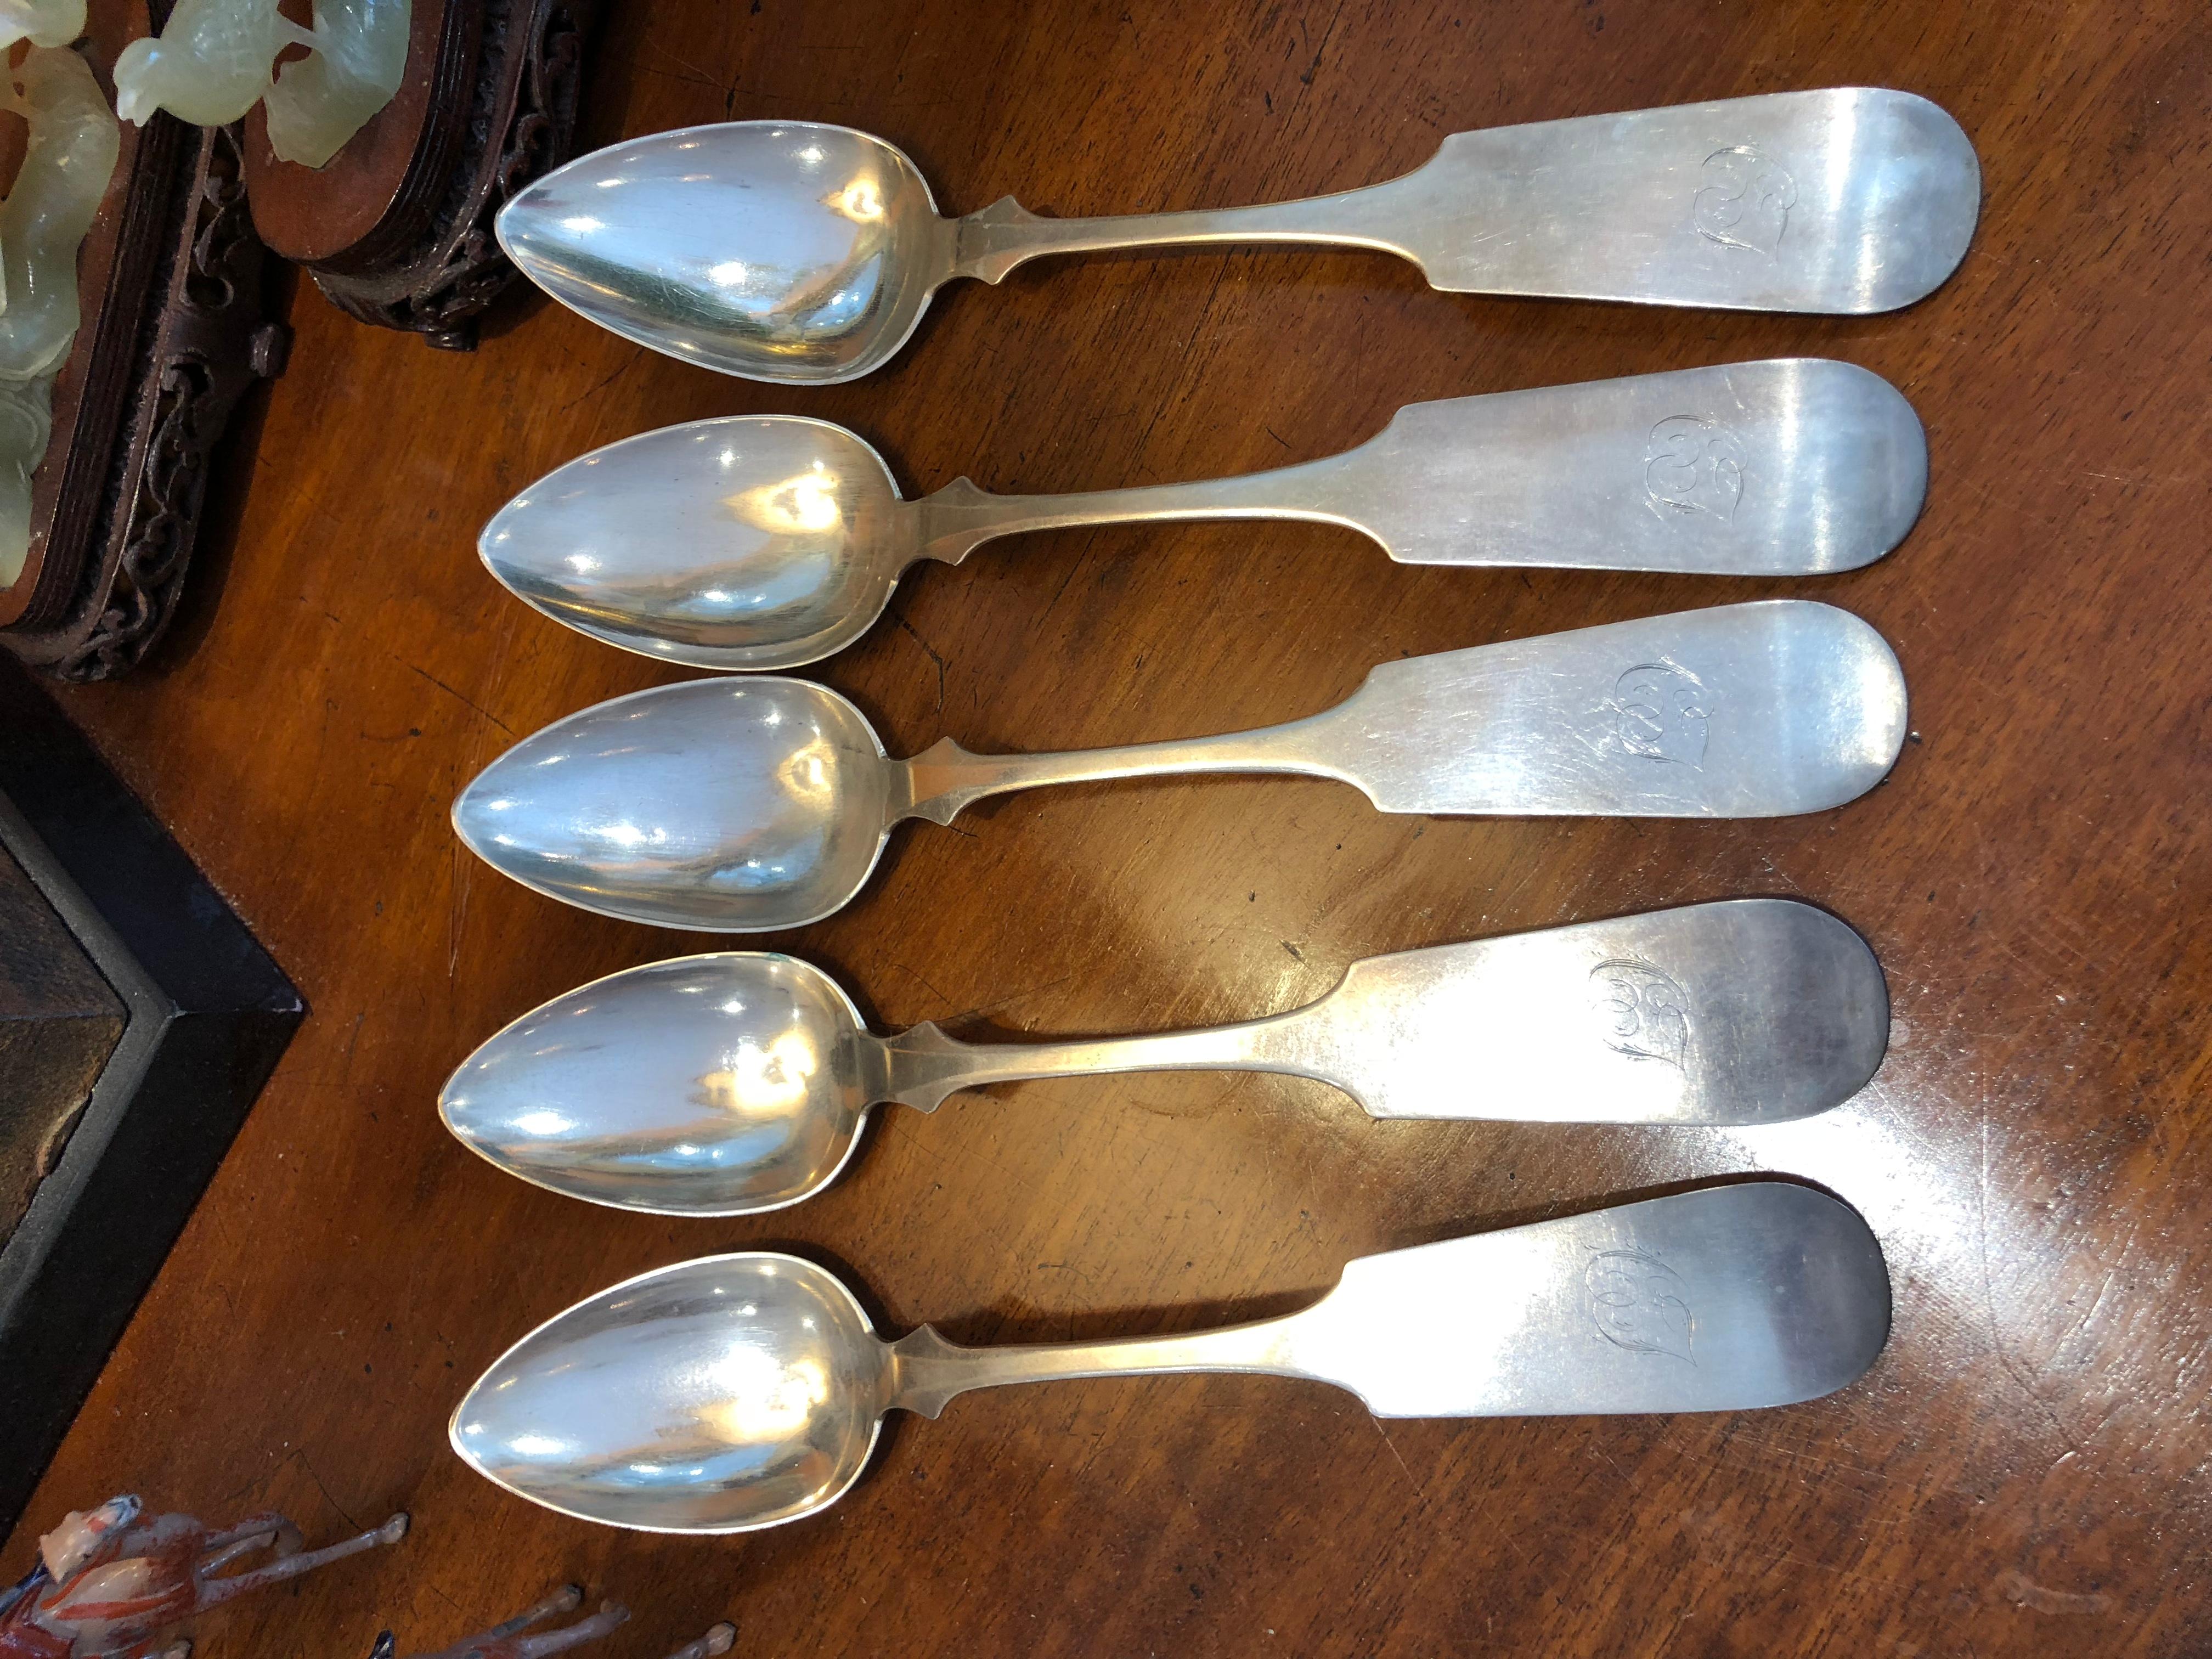 silver marks on spoons